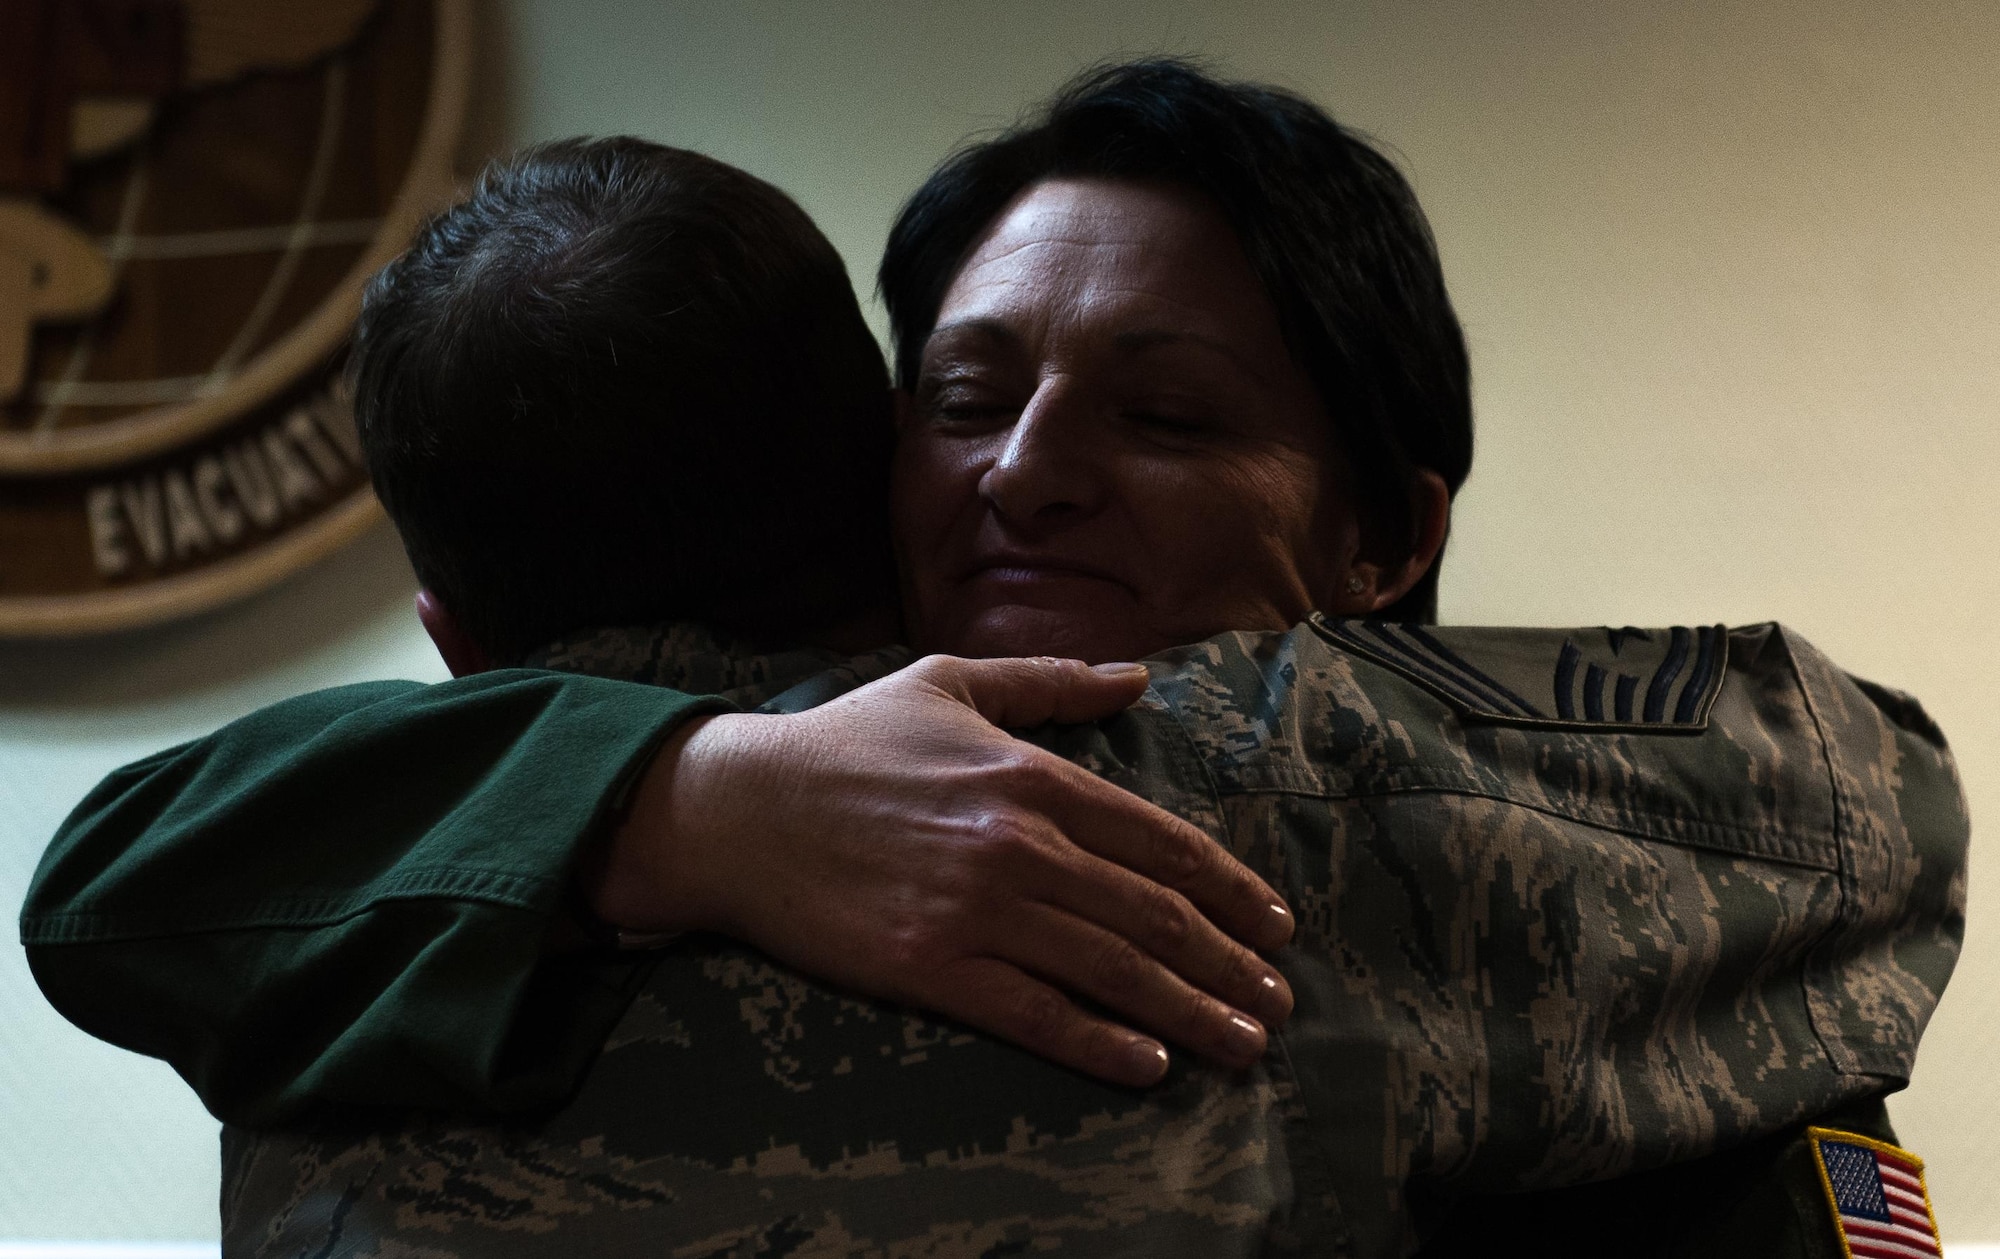 Senior Master Sgt. Mellisa Crawley, 86th Aeromedical Evacuation Squadron superintendent, embraces her husband, Chief Master Sgt. Michael Crawley, 86th Force Support Squadron superintendent, after being notified of her promotion to chief master sergeant at Ramstein Air Base, Germany, Dec. 8, 2016. After discovering they were selected for promotion, all selectees came together and celebrated, as well as built more relationships with people across the community. (U.S. Air Force photo by Airman 1st Class Lane T. Plummer)